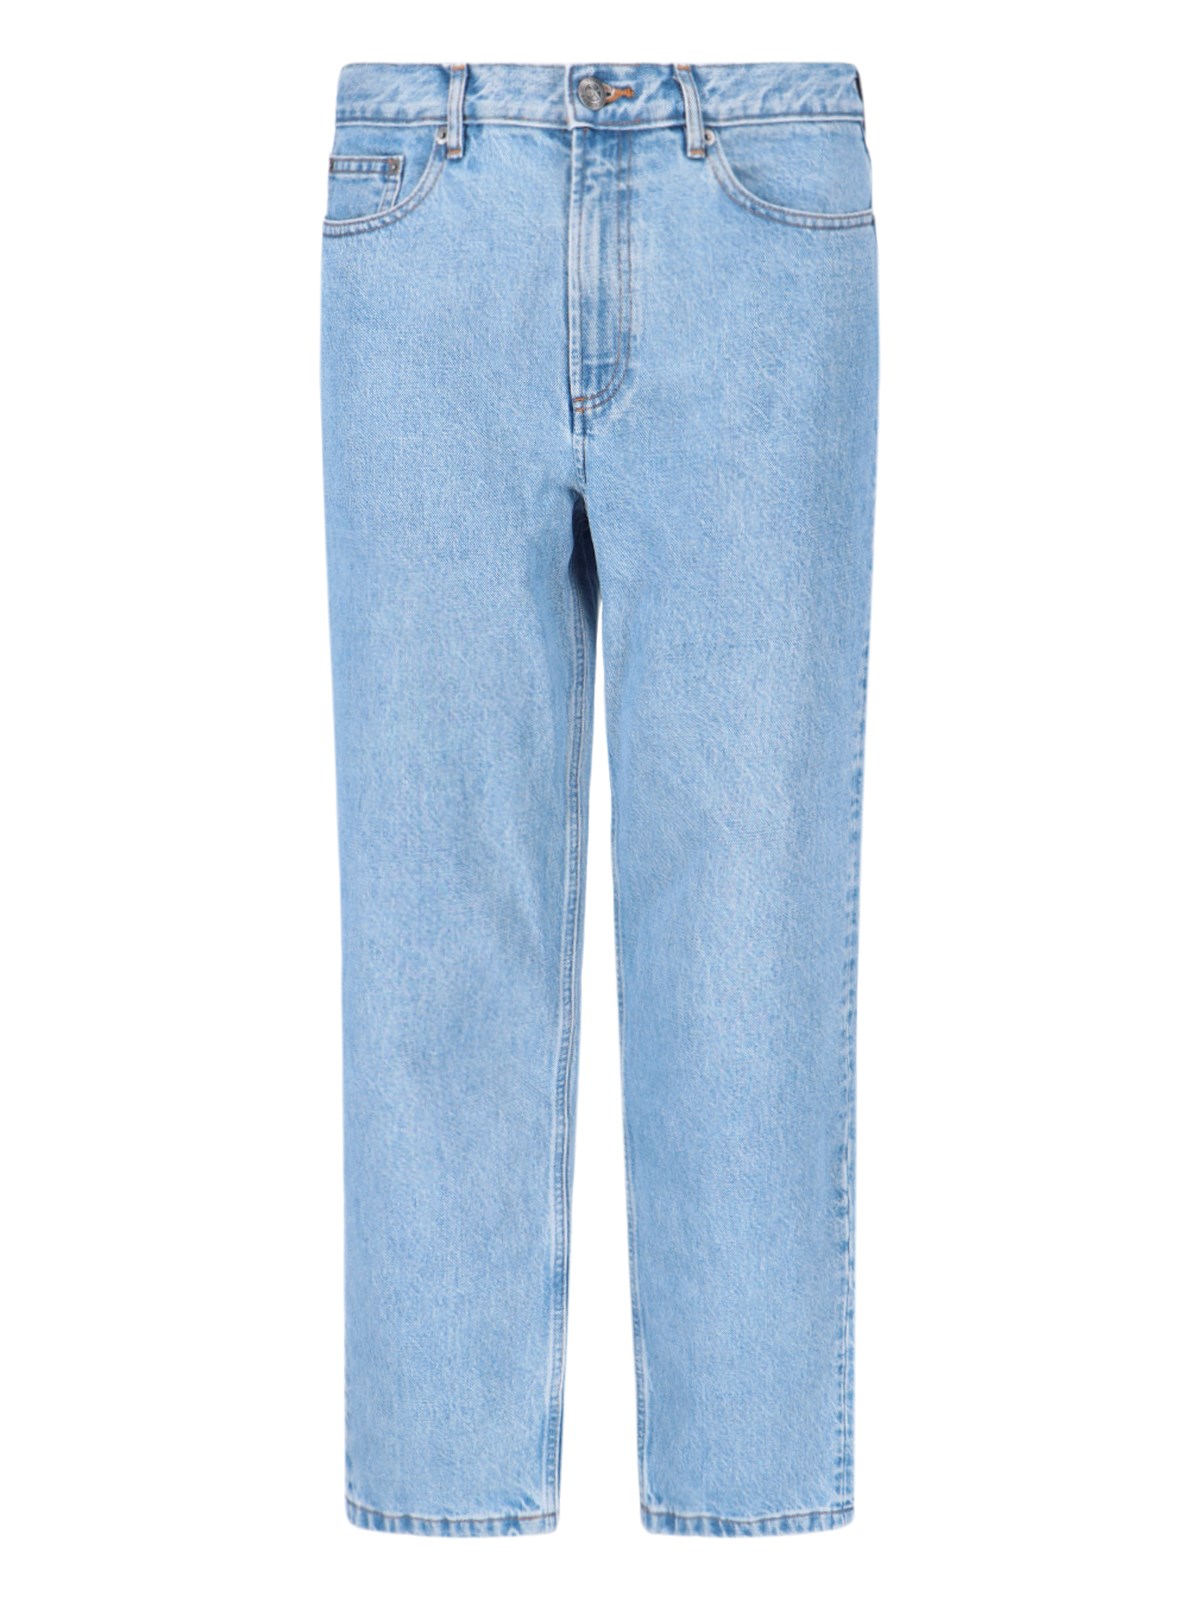 Apc Straight Jeans In Light Blue